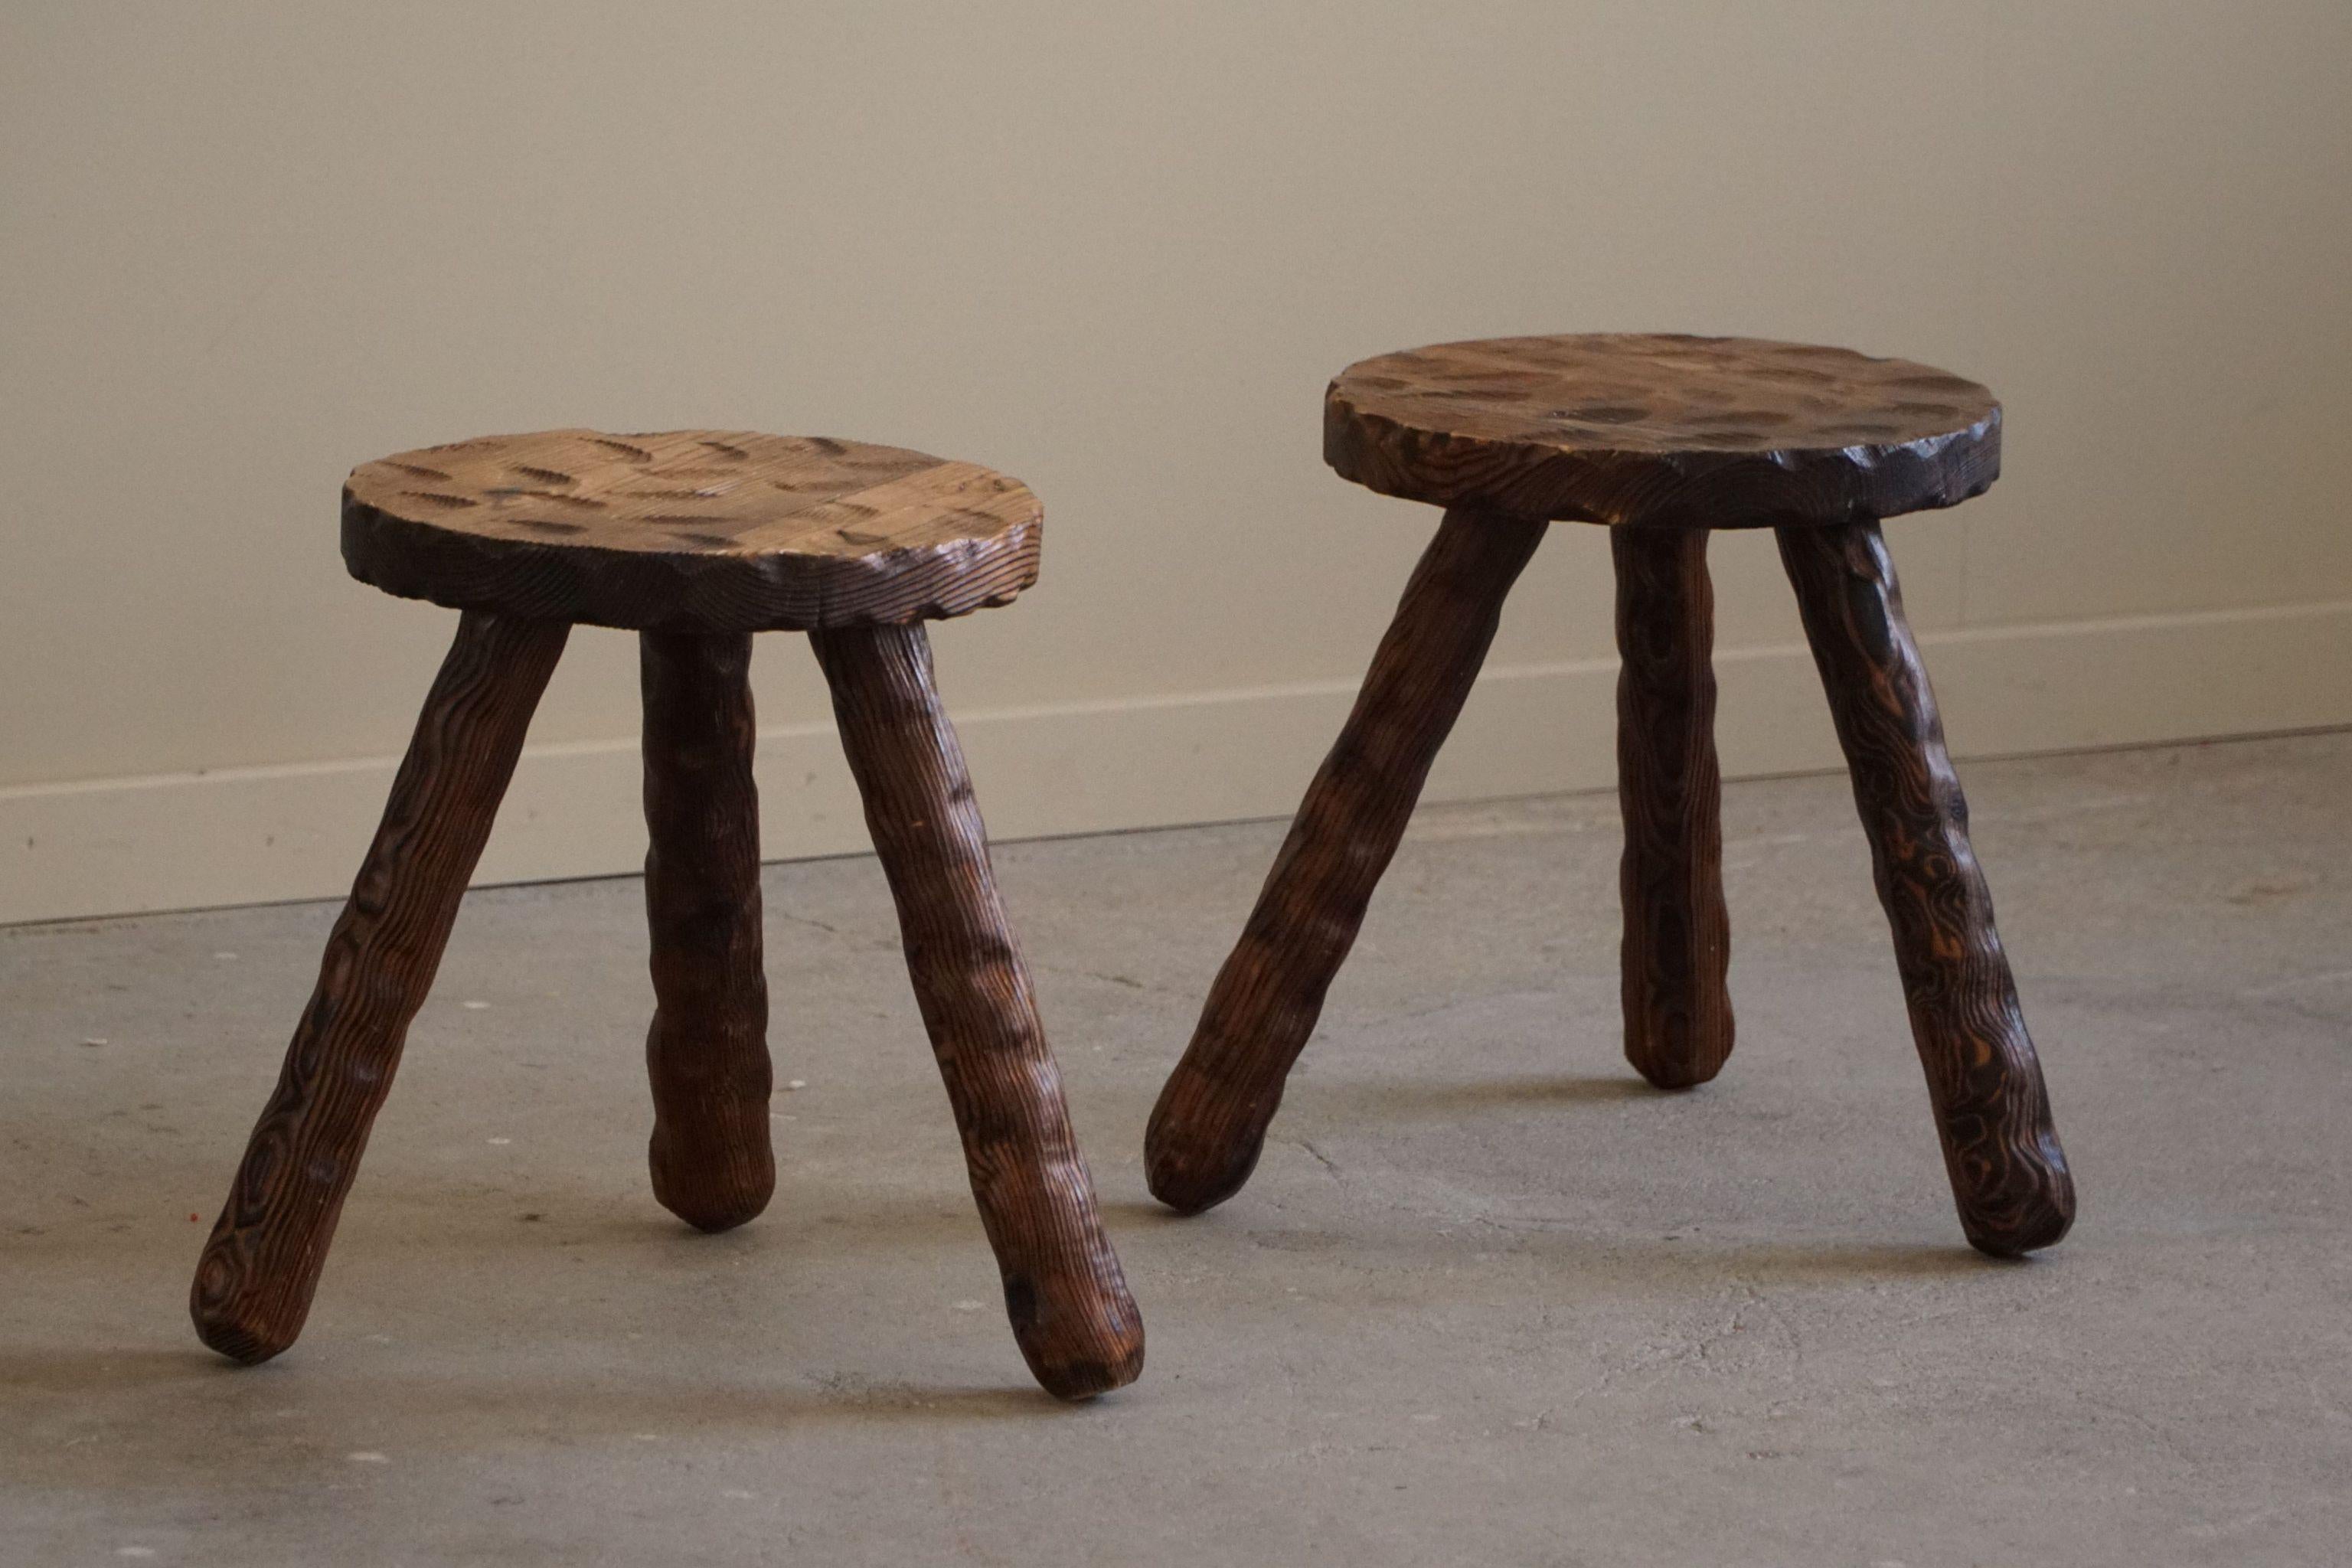 A Pair of Carved Wabi Sabi Stools in Pine, Swedish Mid Century Modern, 1960s For Sale 4